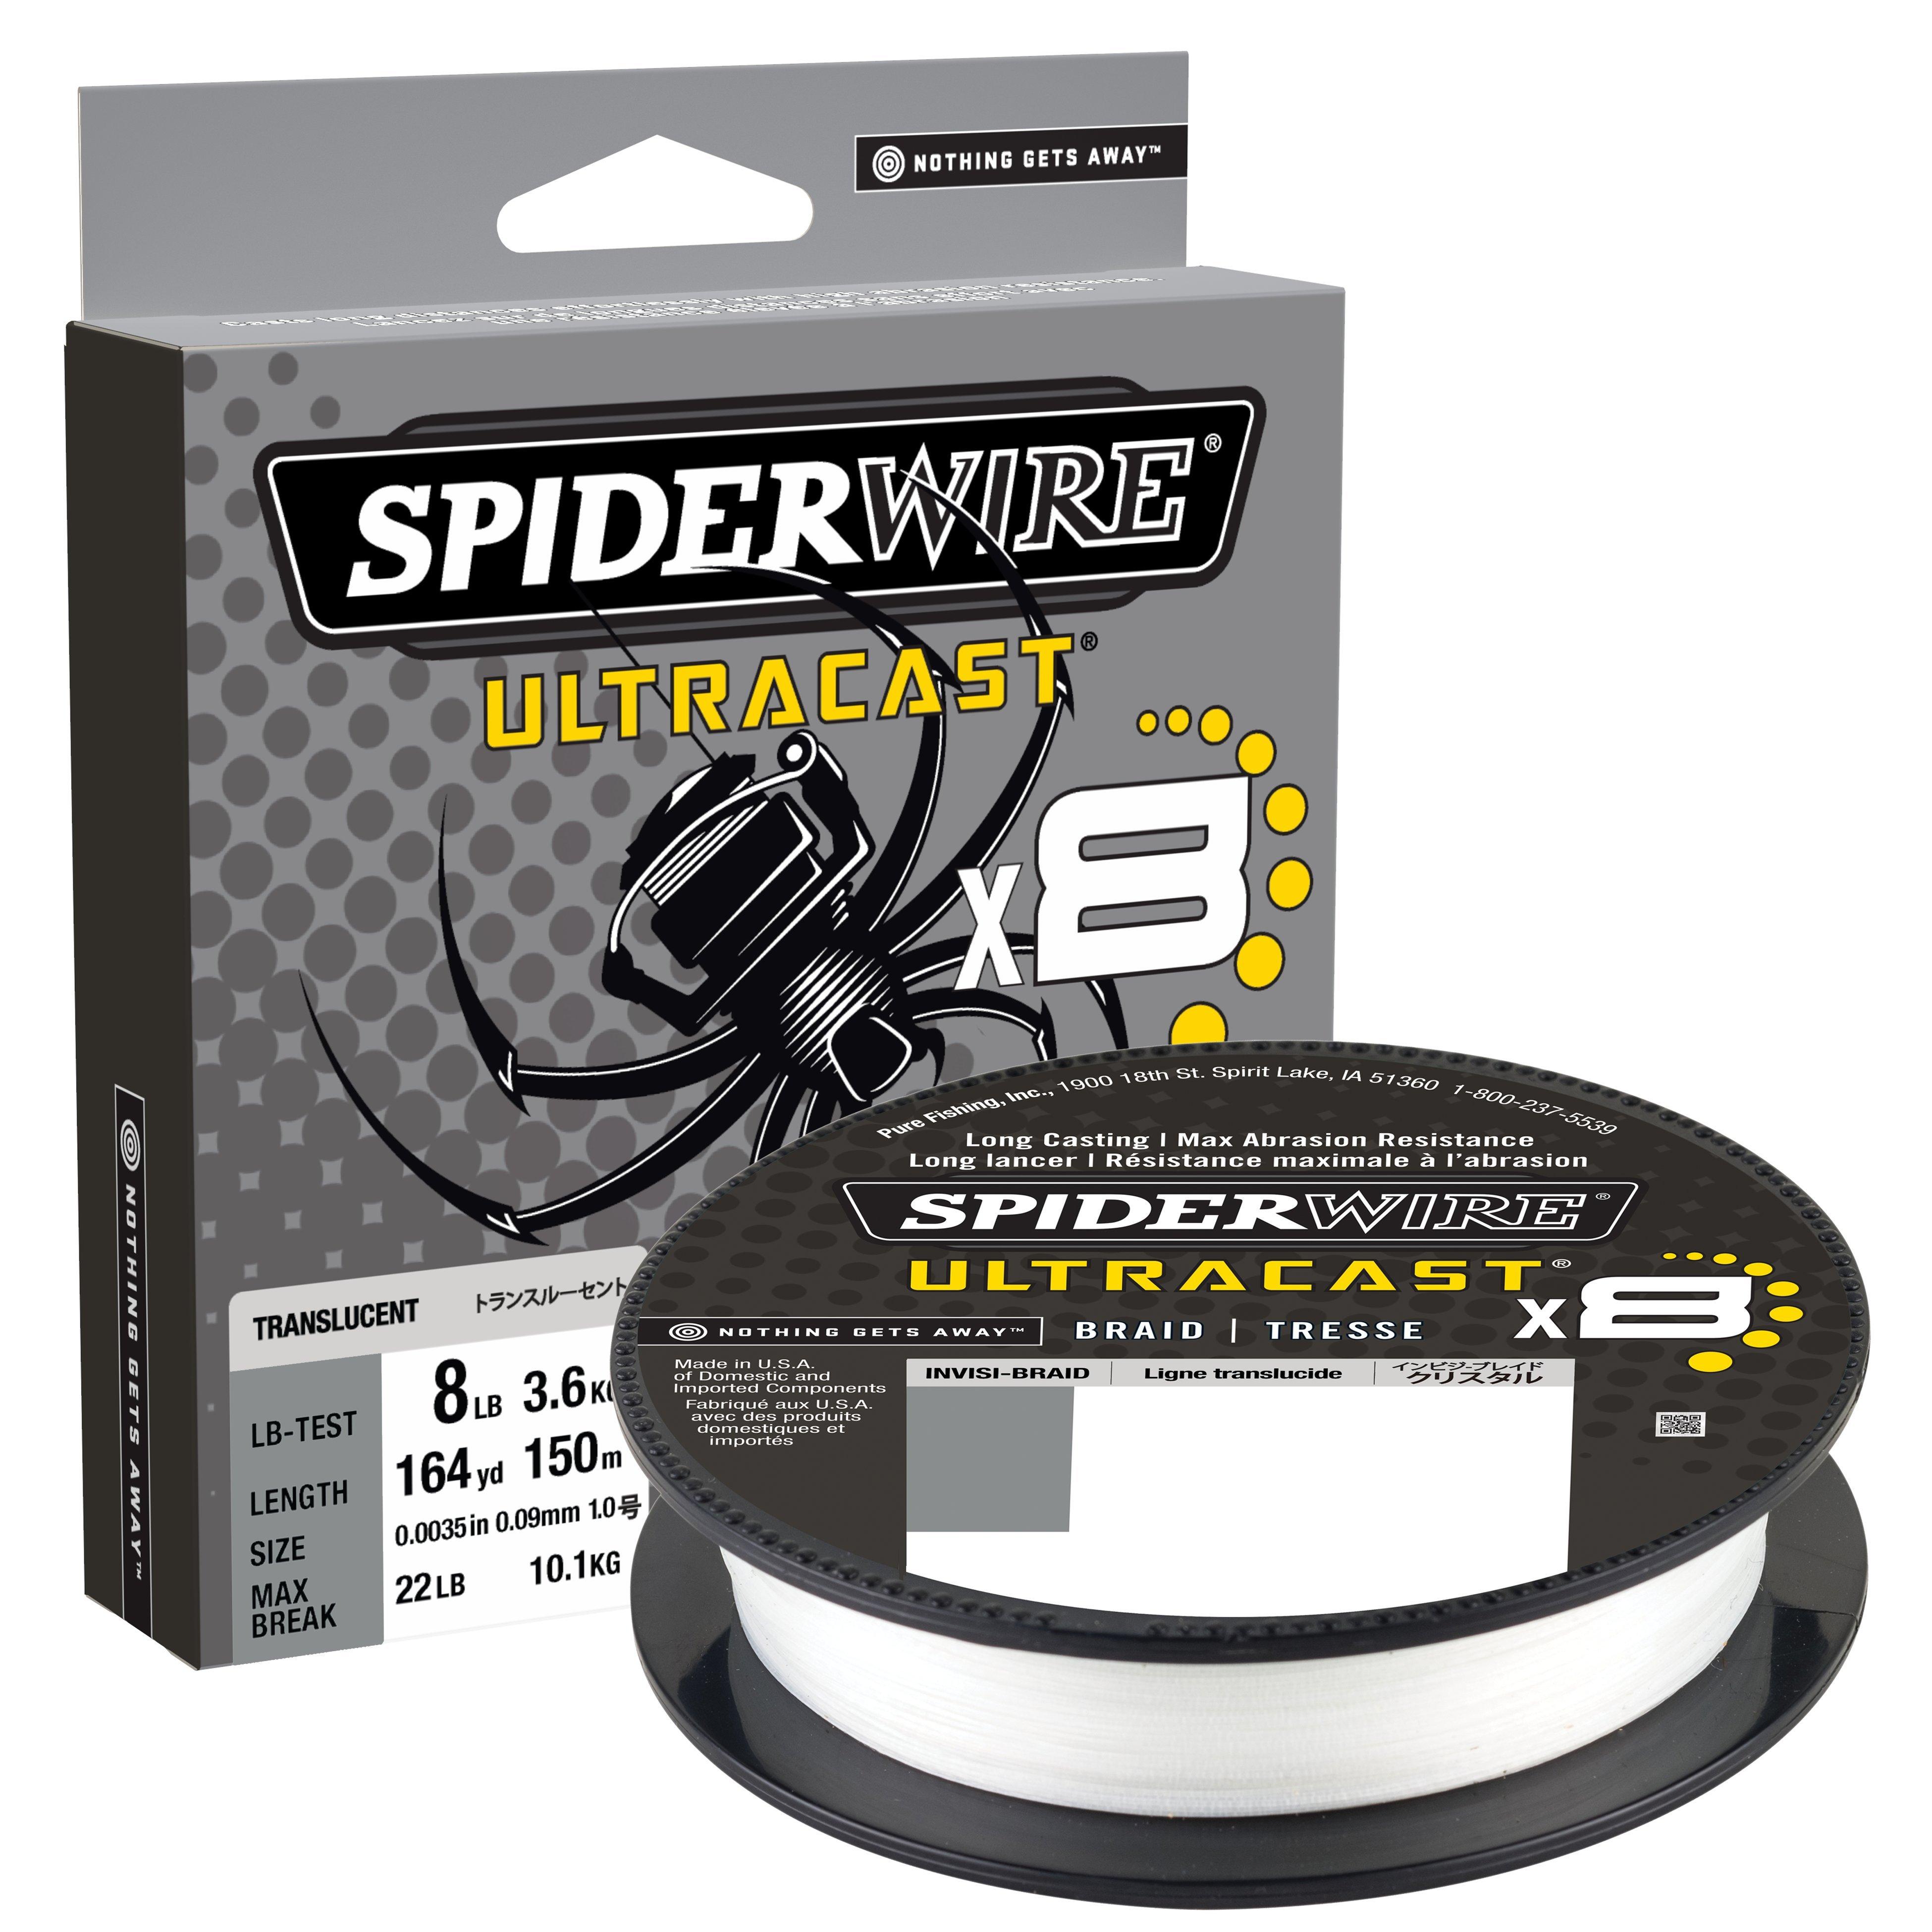 SPIDERWIRE Stealth Smooth, 2000m, Braided Fishing Line 0.07mm